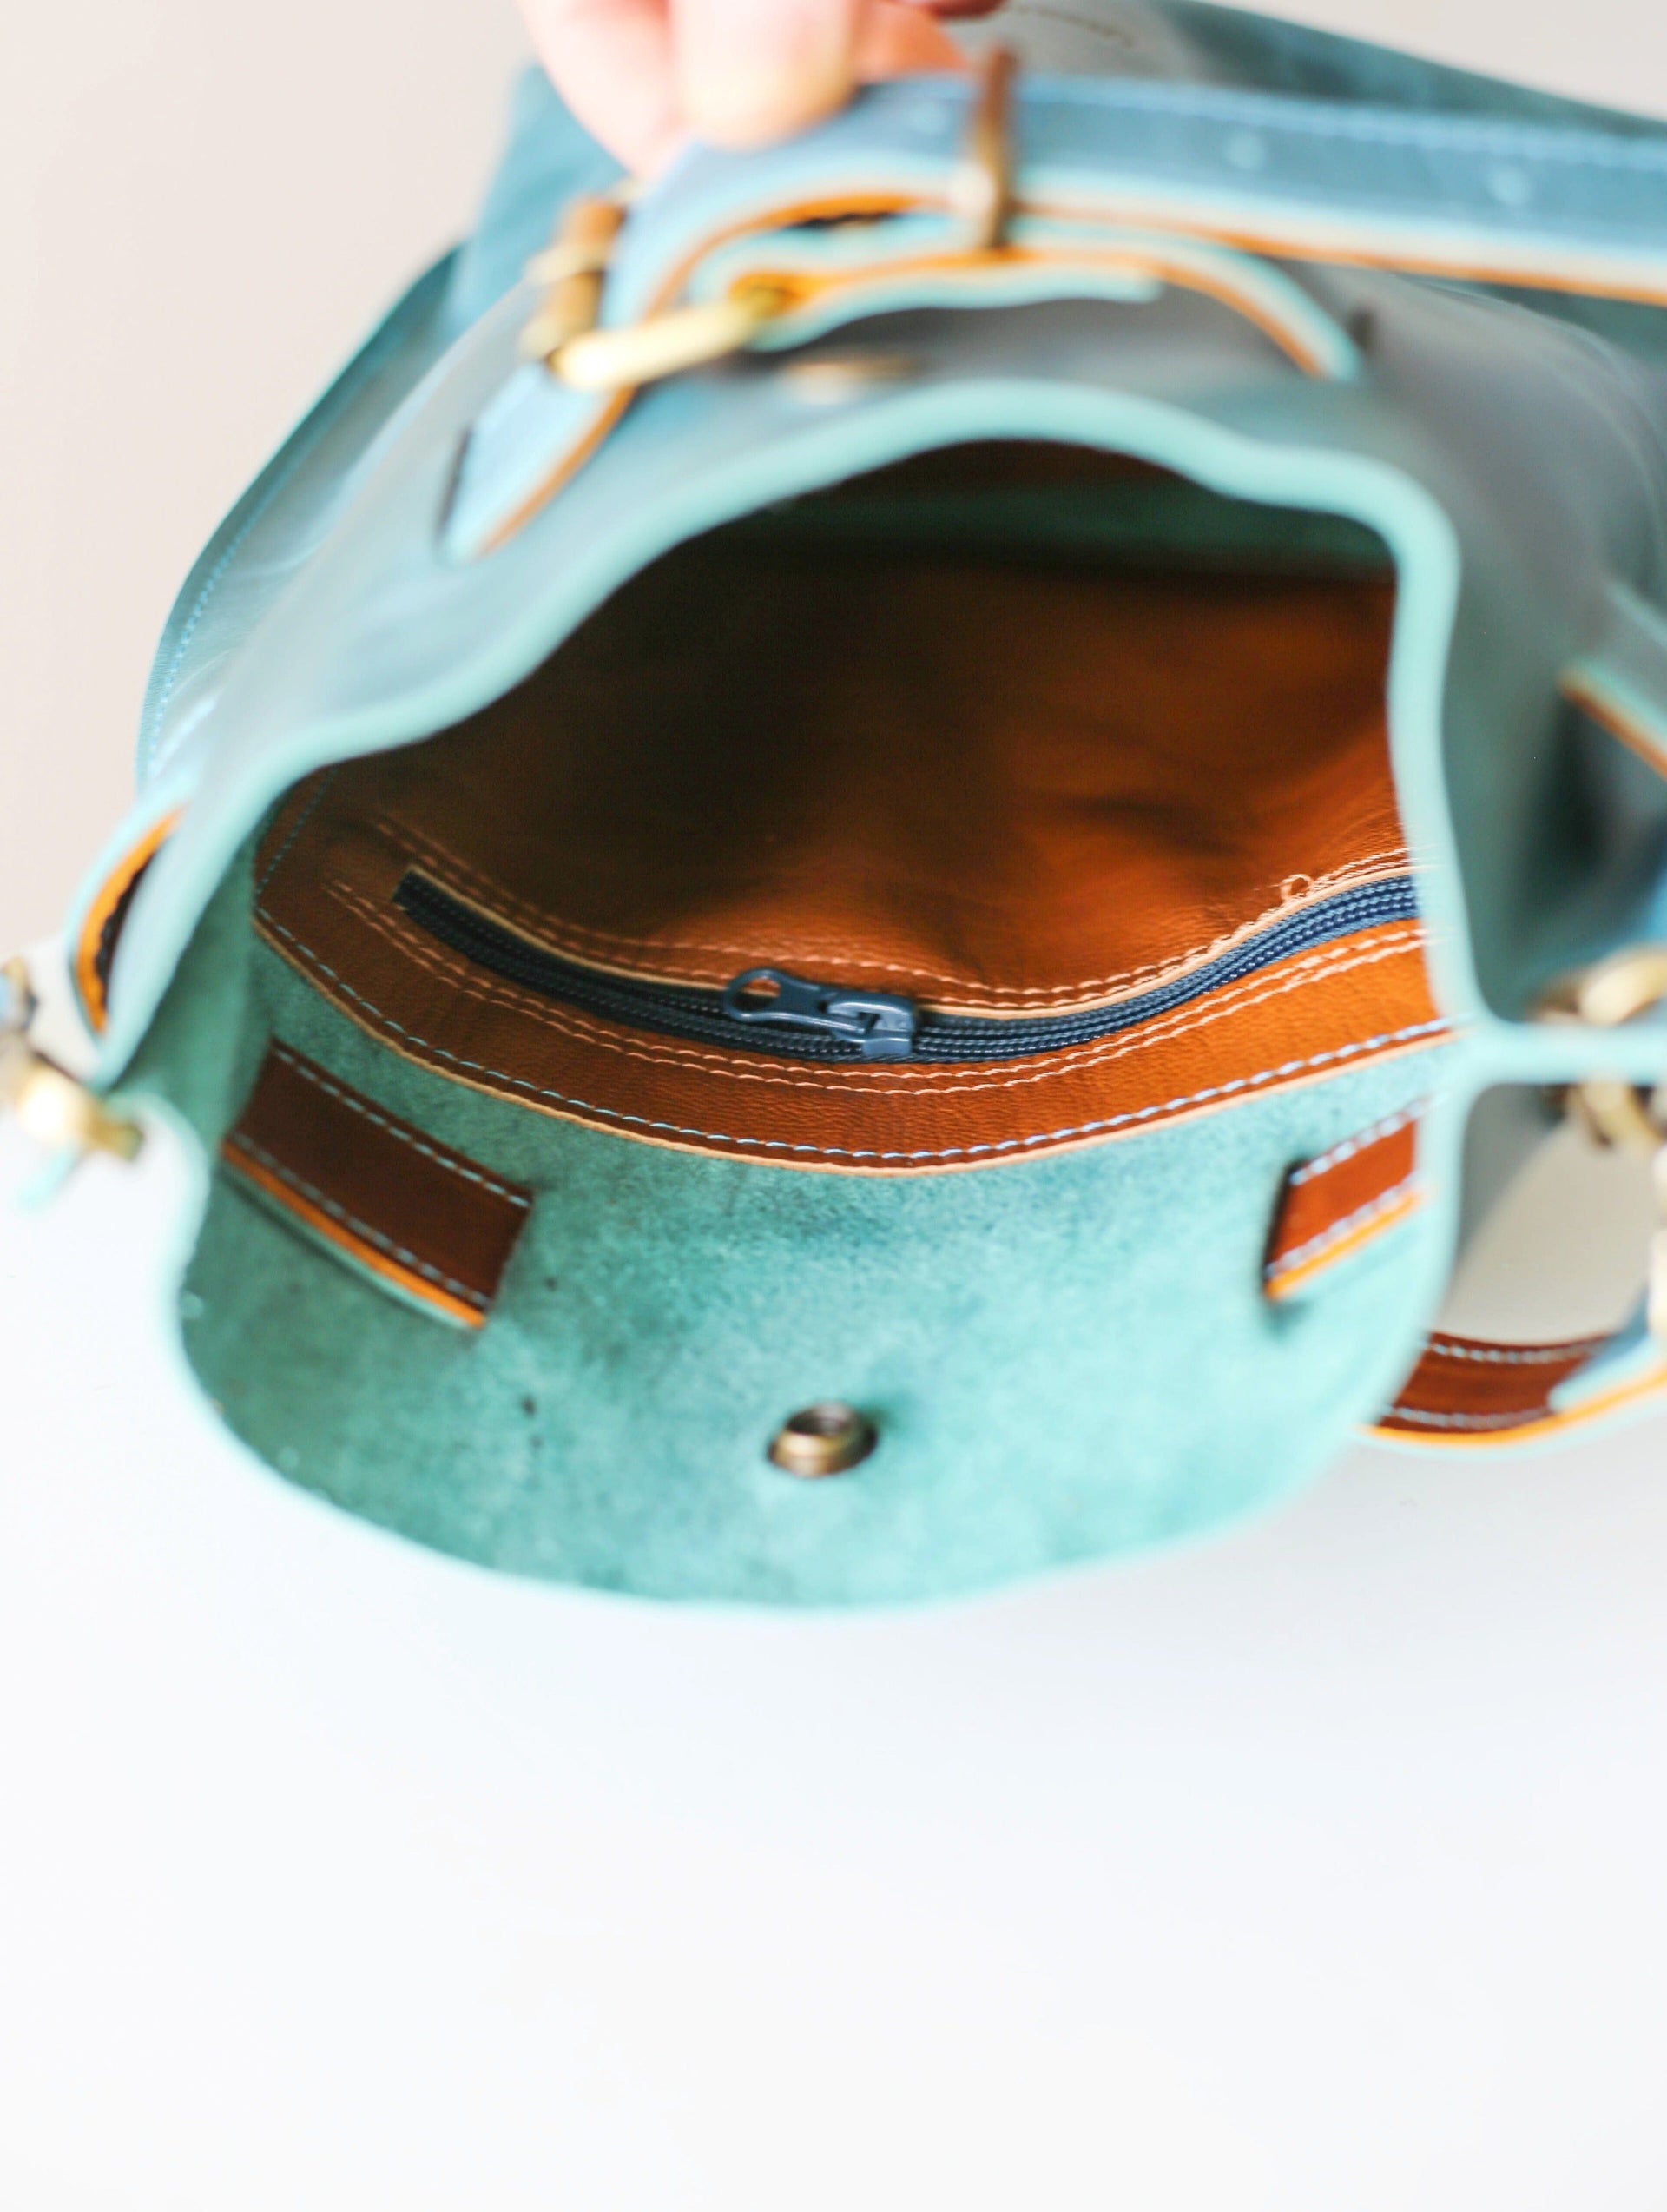 interior of a blue leather bag